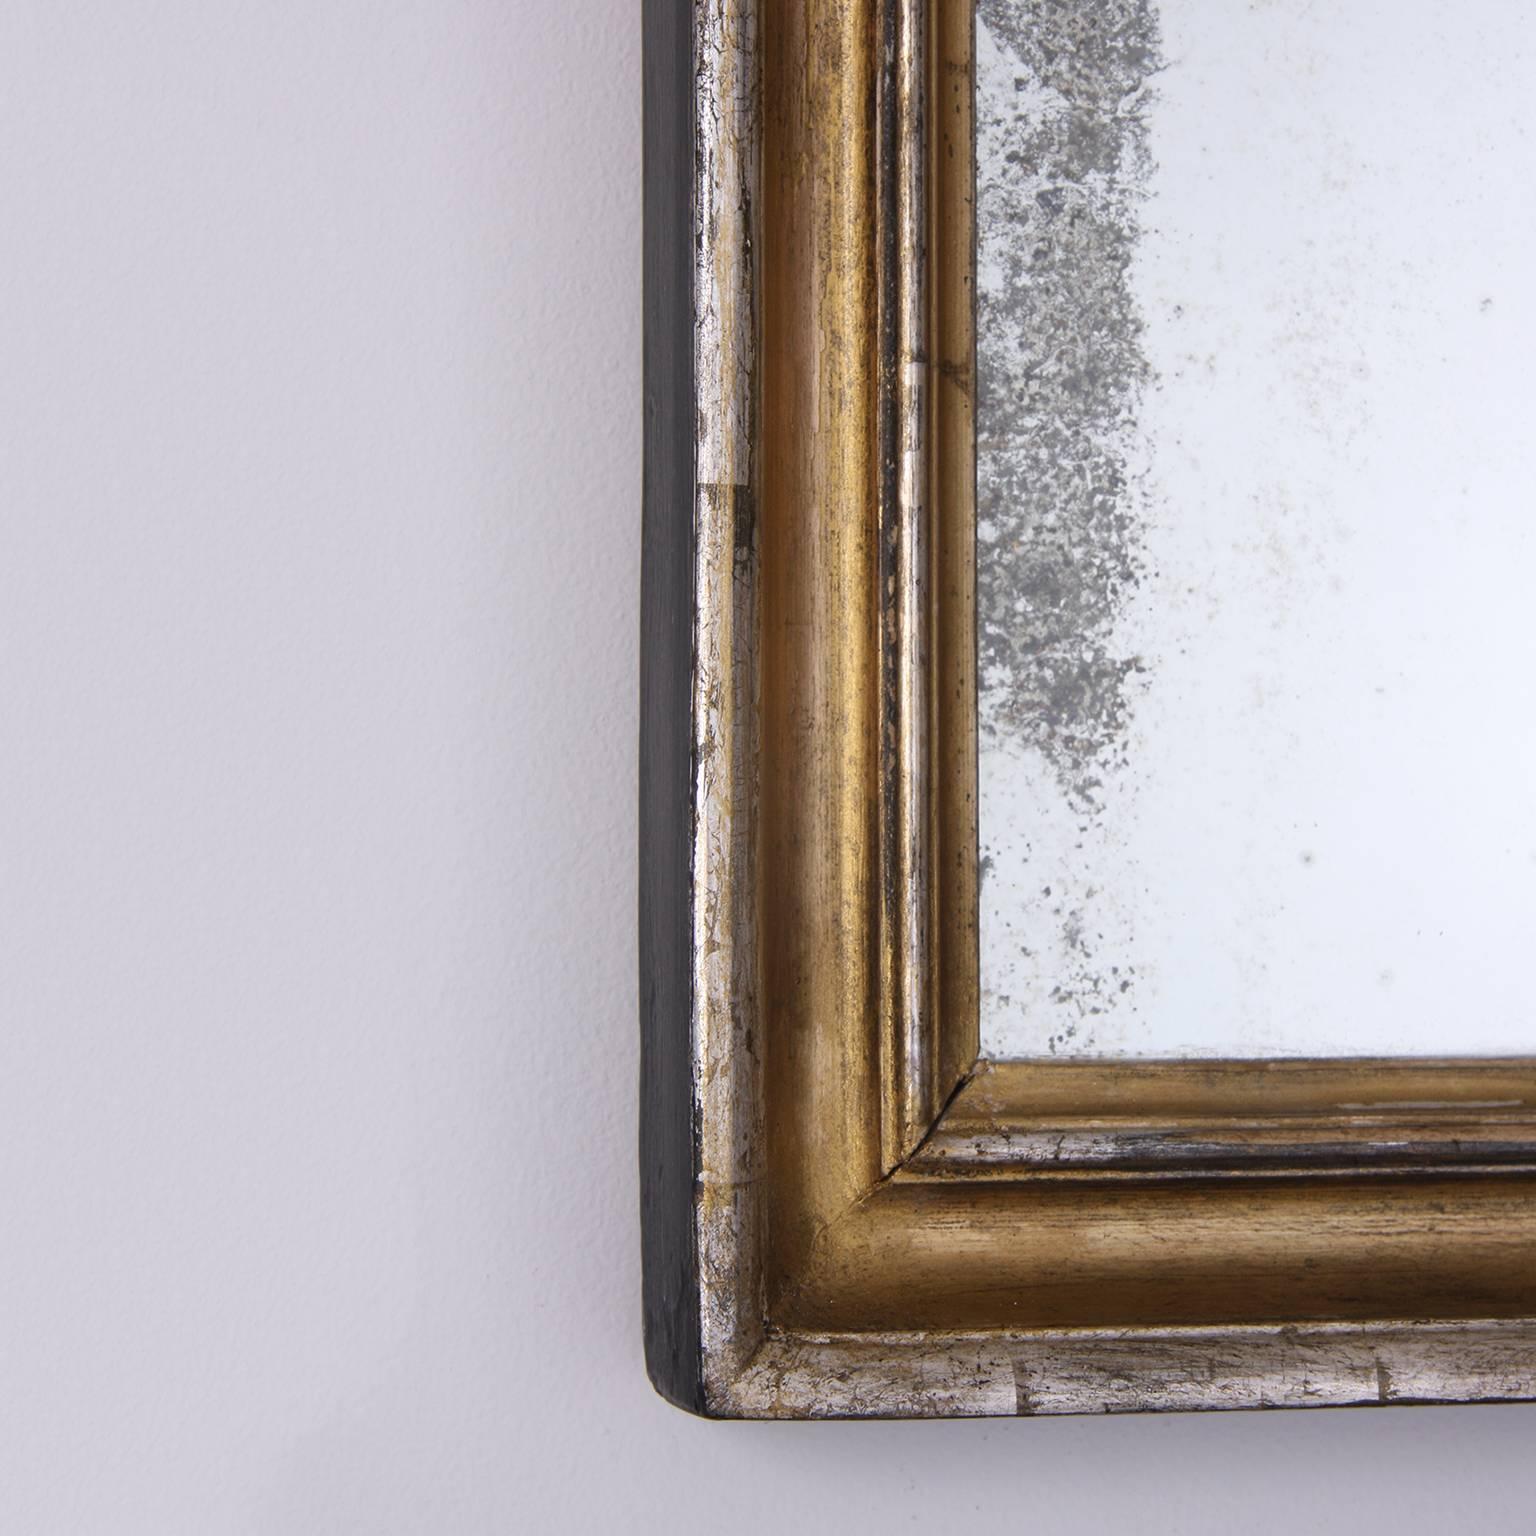 Small mirror with a two tone frame, gilded and silver leaf. Original plate with a lovely age to the glass.